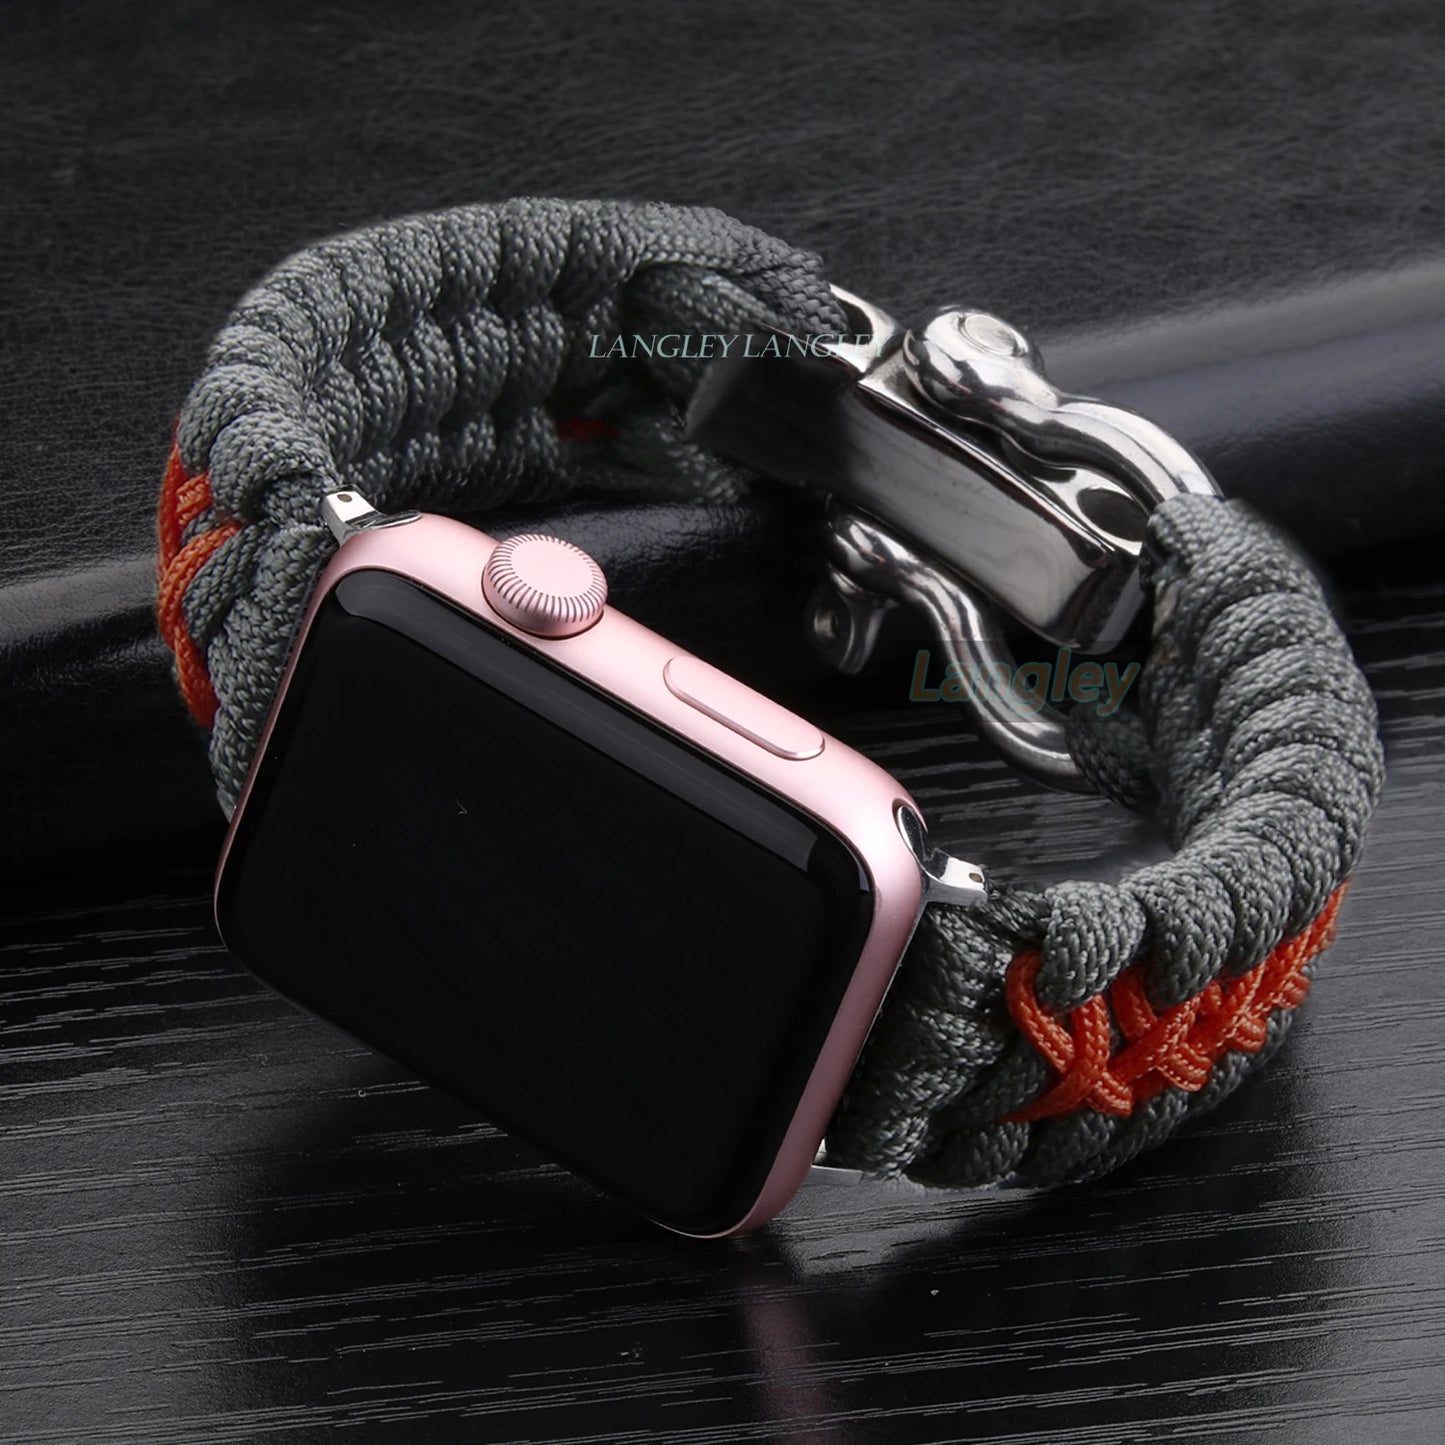 Braided Nylon Bracelet for Apple Watch with Adjustable Buckle (S 145mm - 150mm - 155mm)